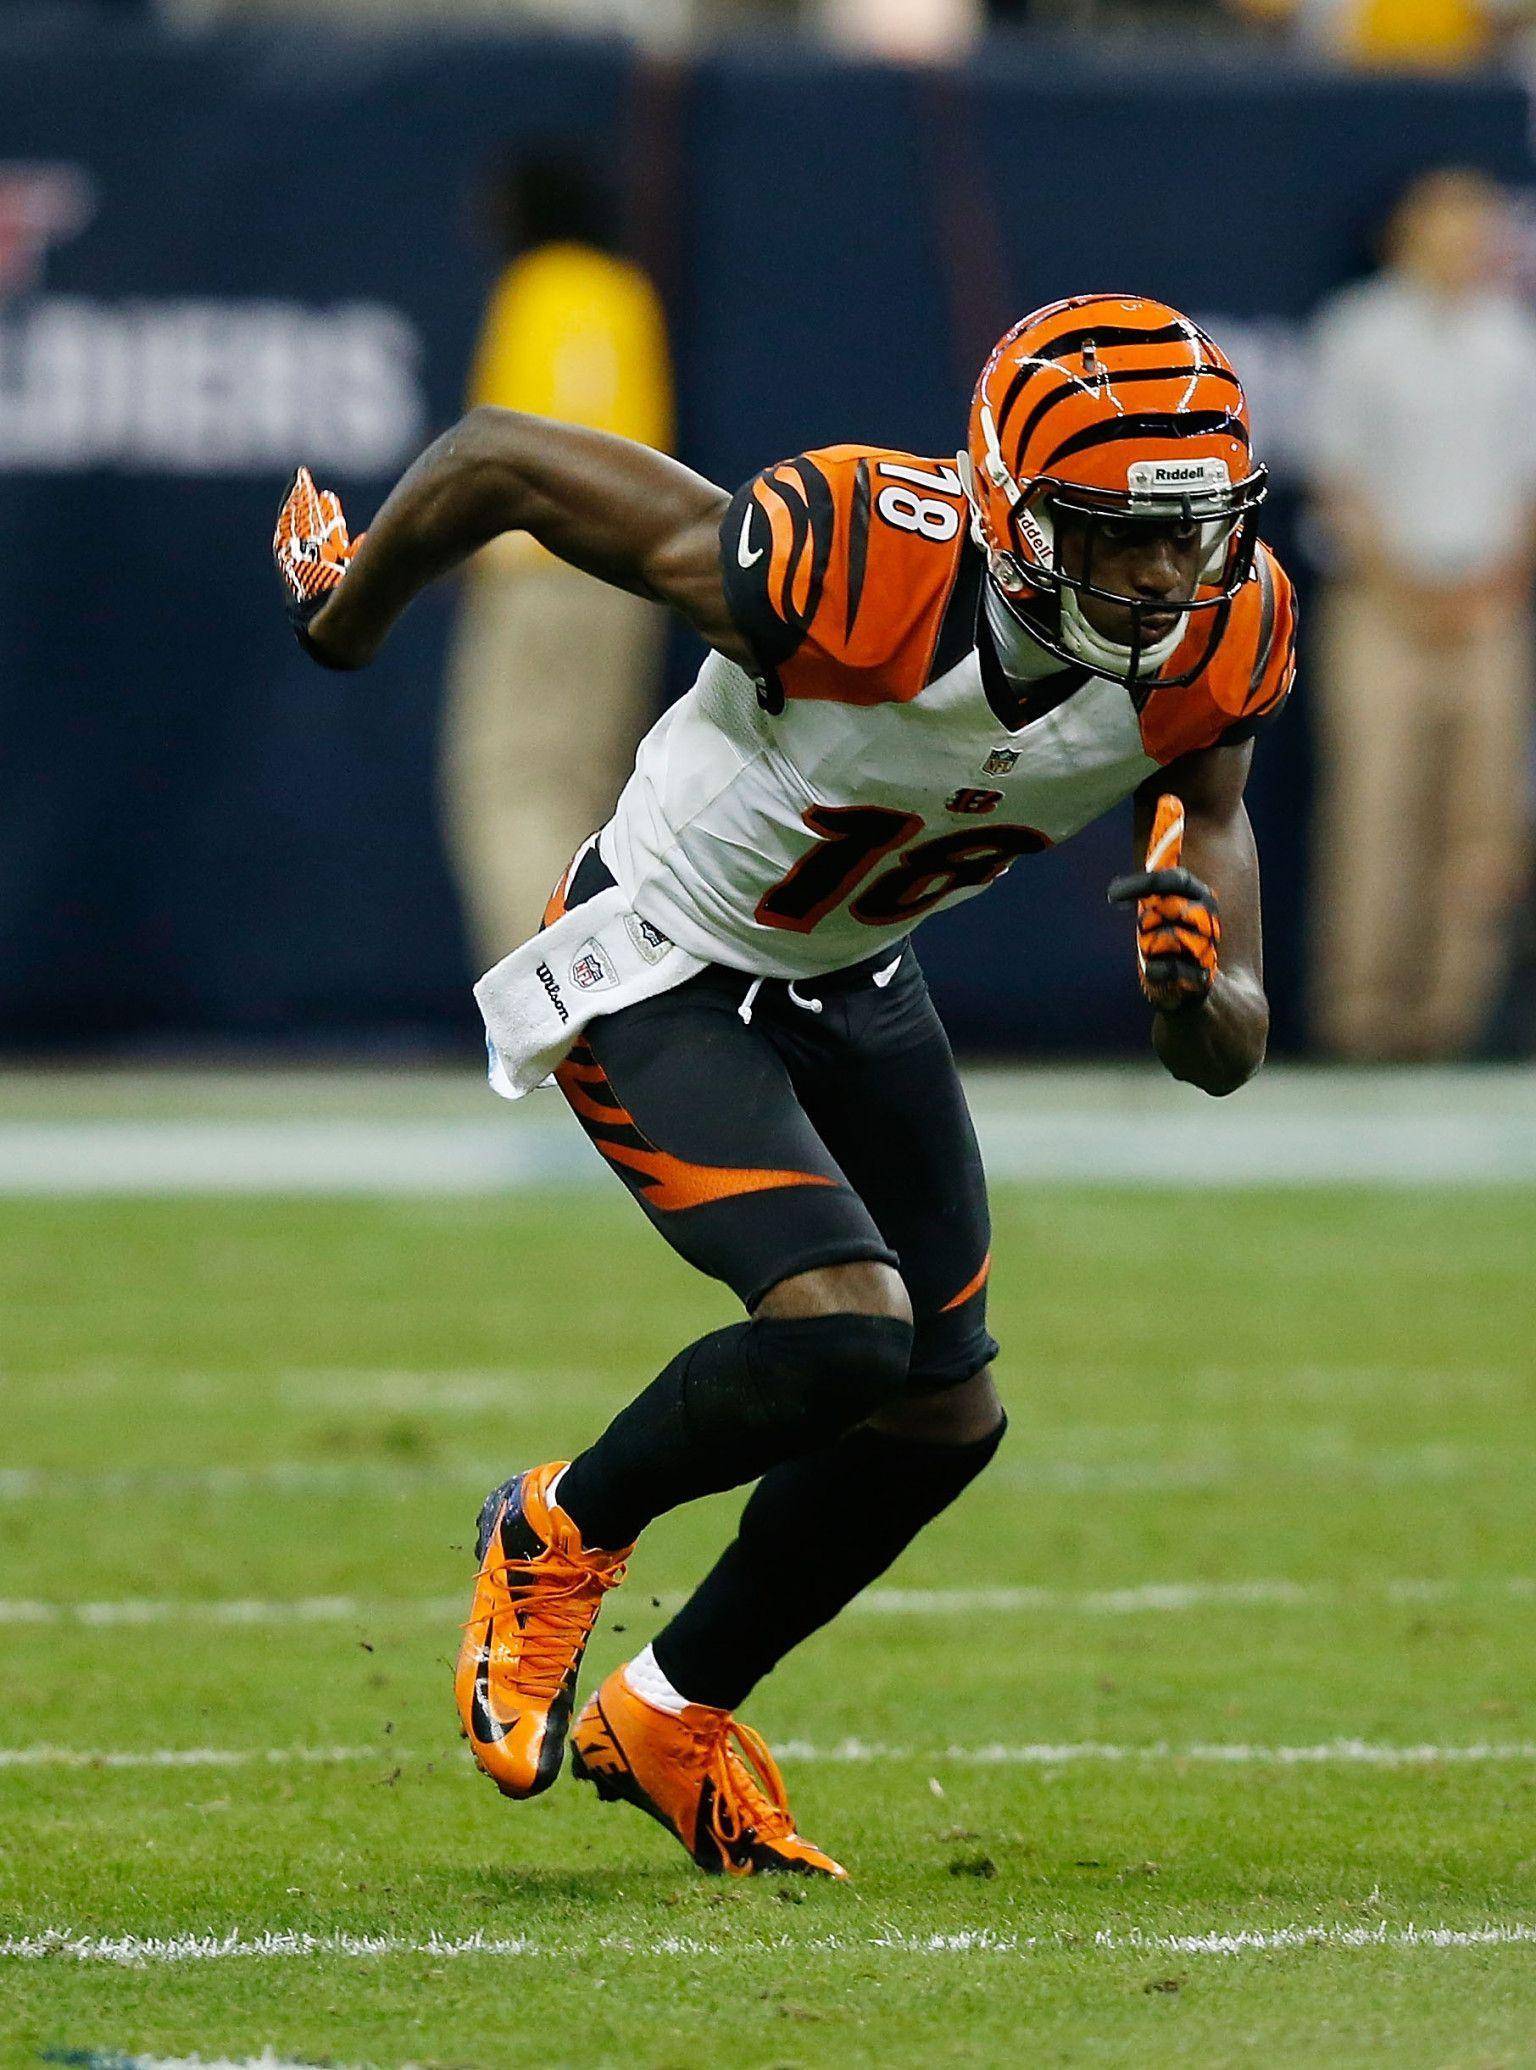 AJ Green Injury: Bengals Wide Out Has Bruised Knee